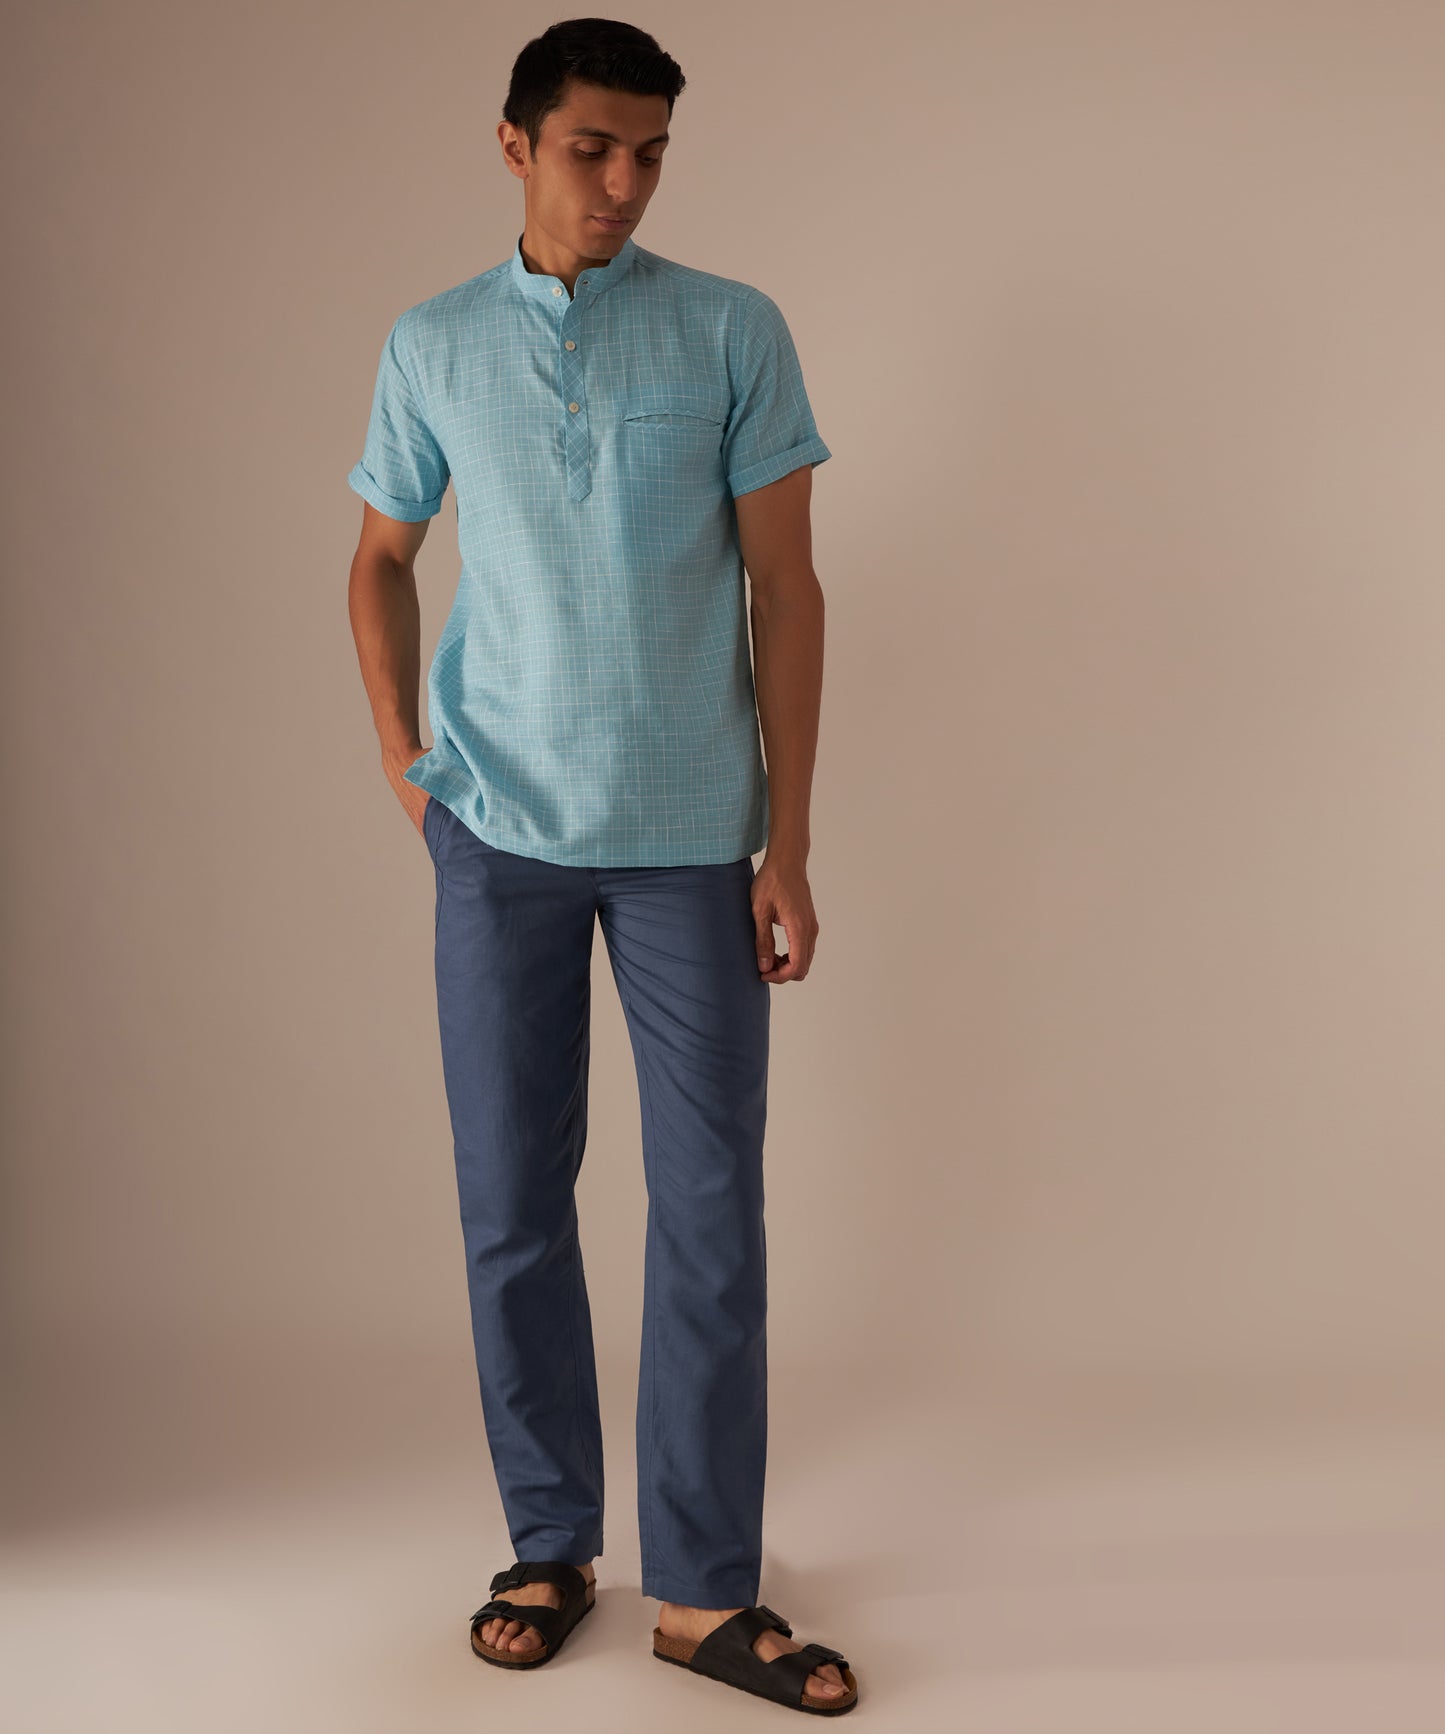 Teal Popover Shirt